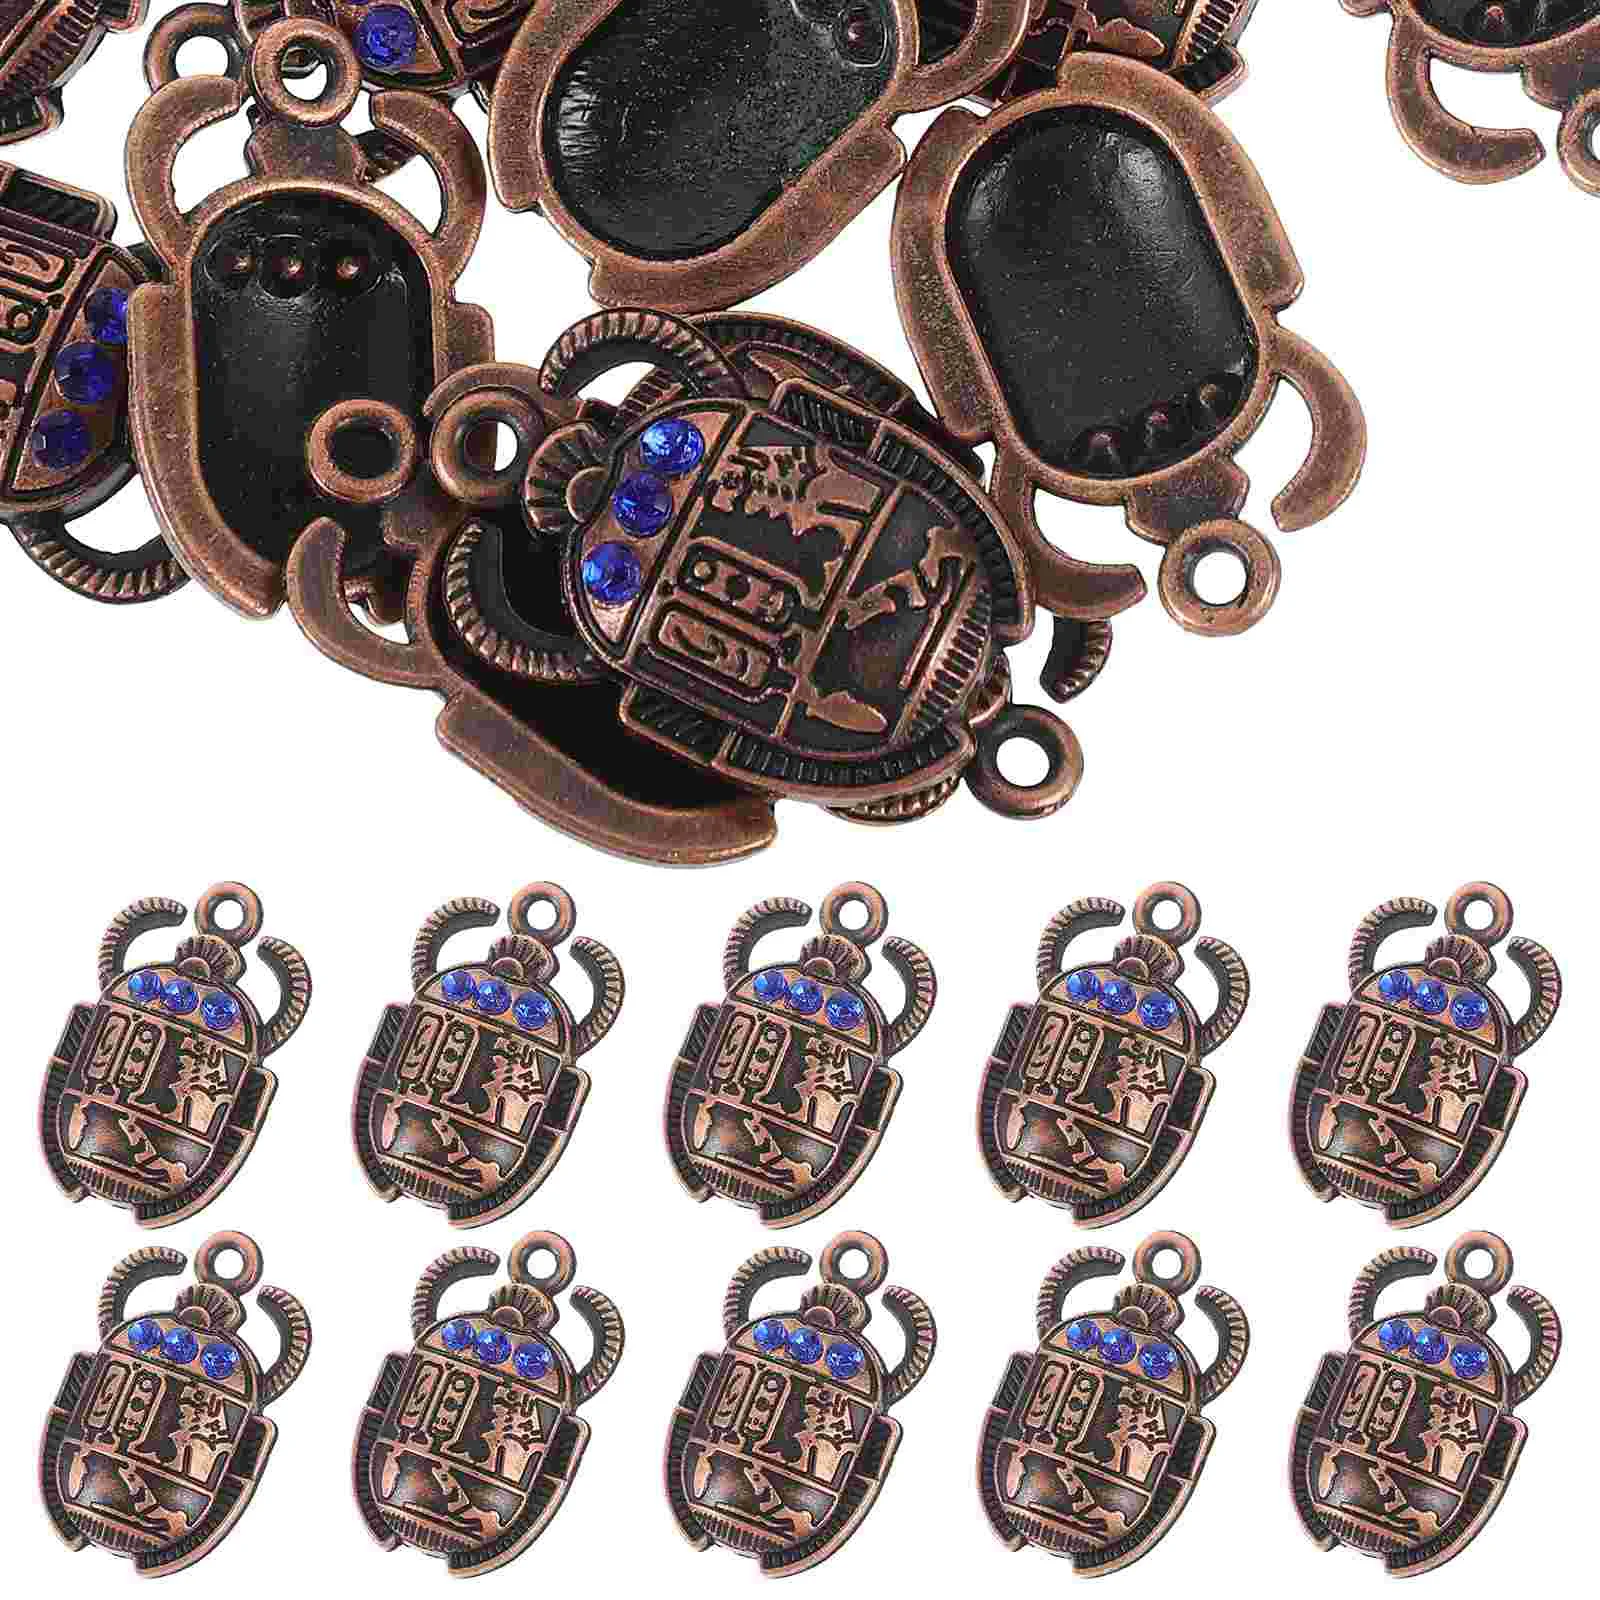 

20 Pcs Scarab Pendant Beetle Charm Metal Charms Jewelry Making Choker DIY Accessories Egyptian Material Necklace